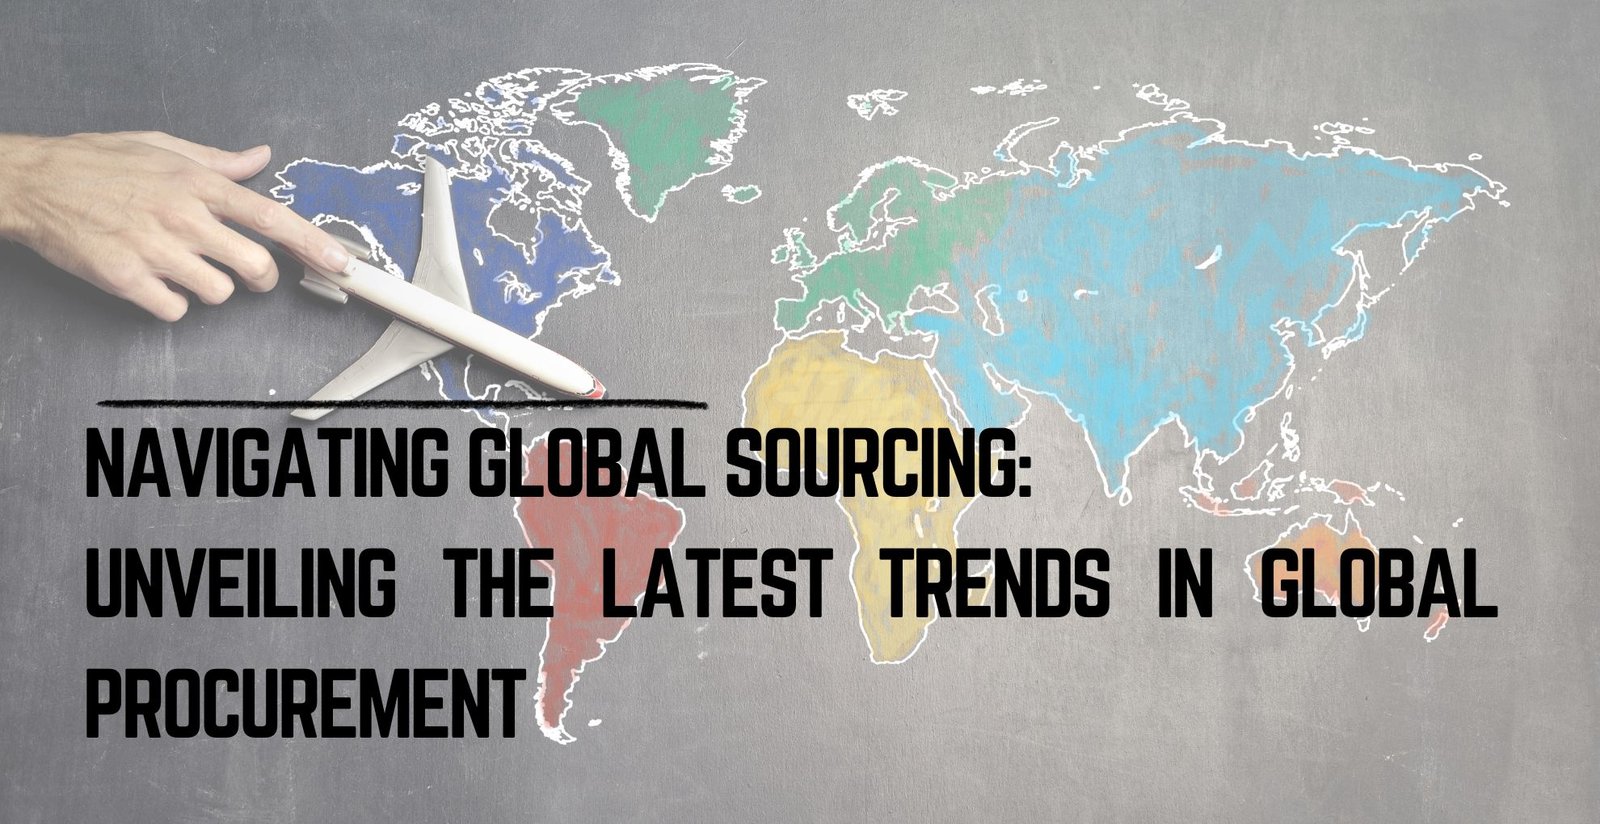 Navigating Global Sourcing Unveiling the Latest Trends in Global Procurement